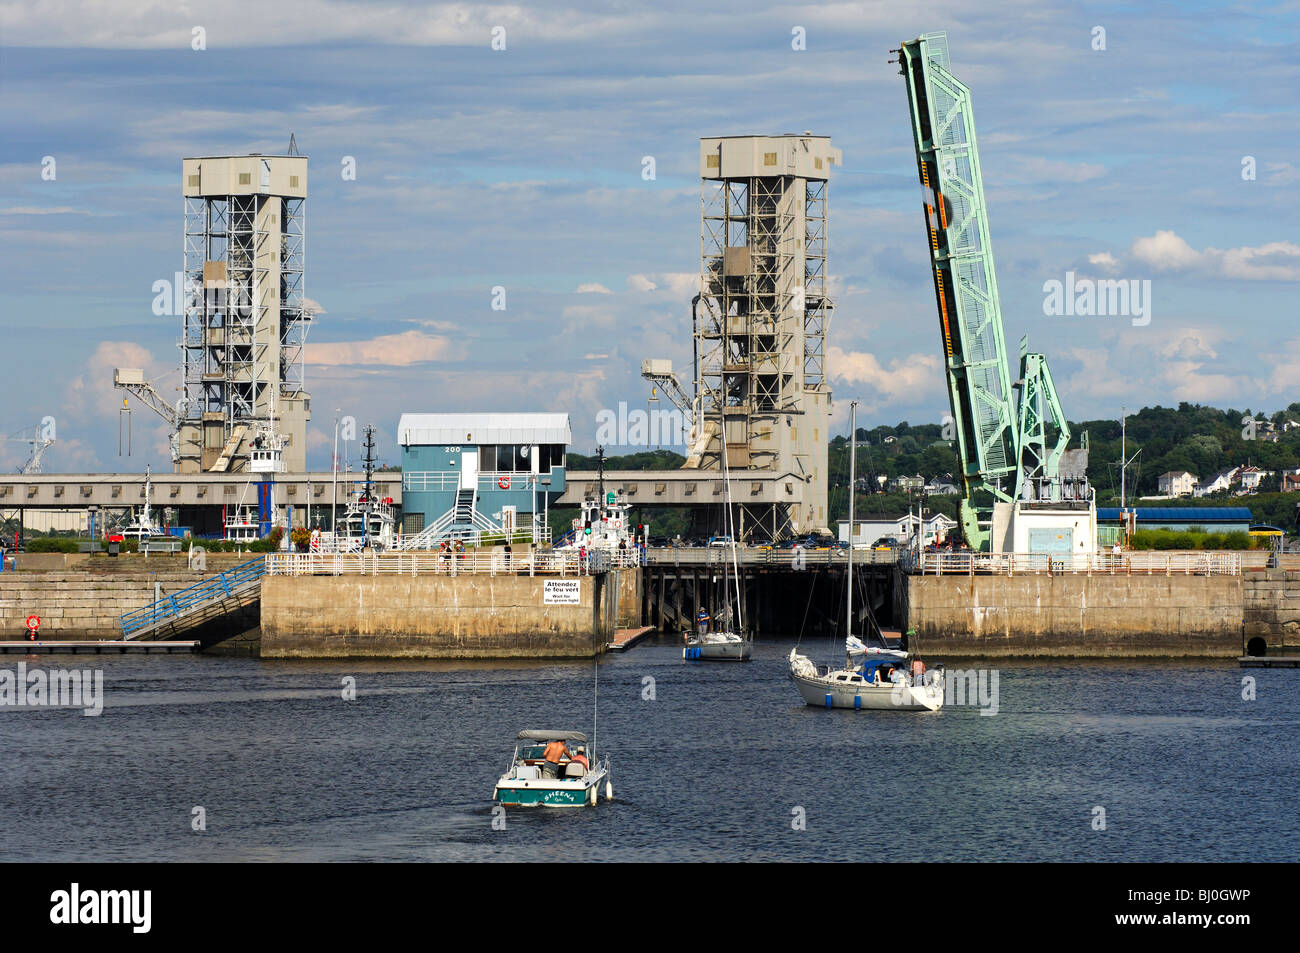 Boat lock and open drawbridge in the basin of the river port on the St. Lawrence River, Quebec City, Canada Stock Photo